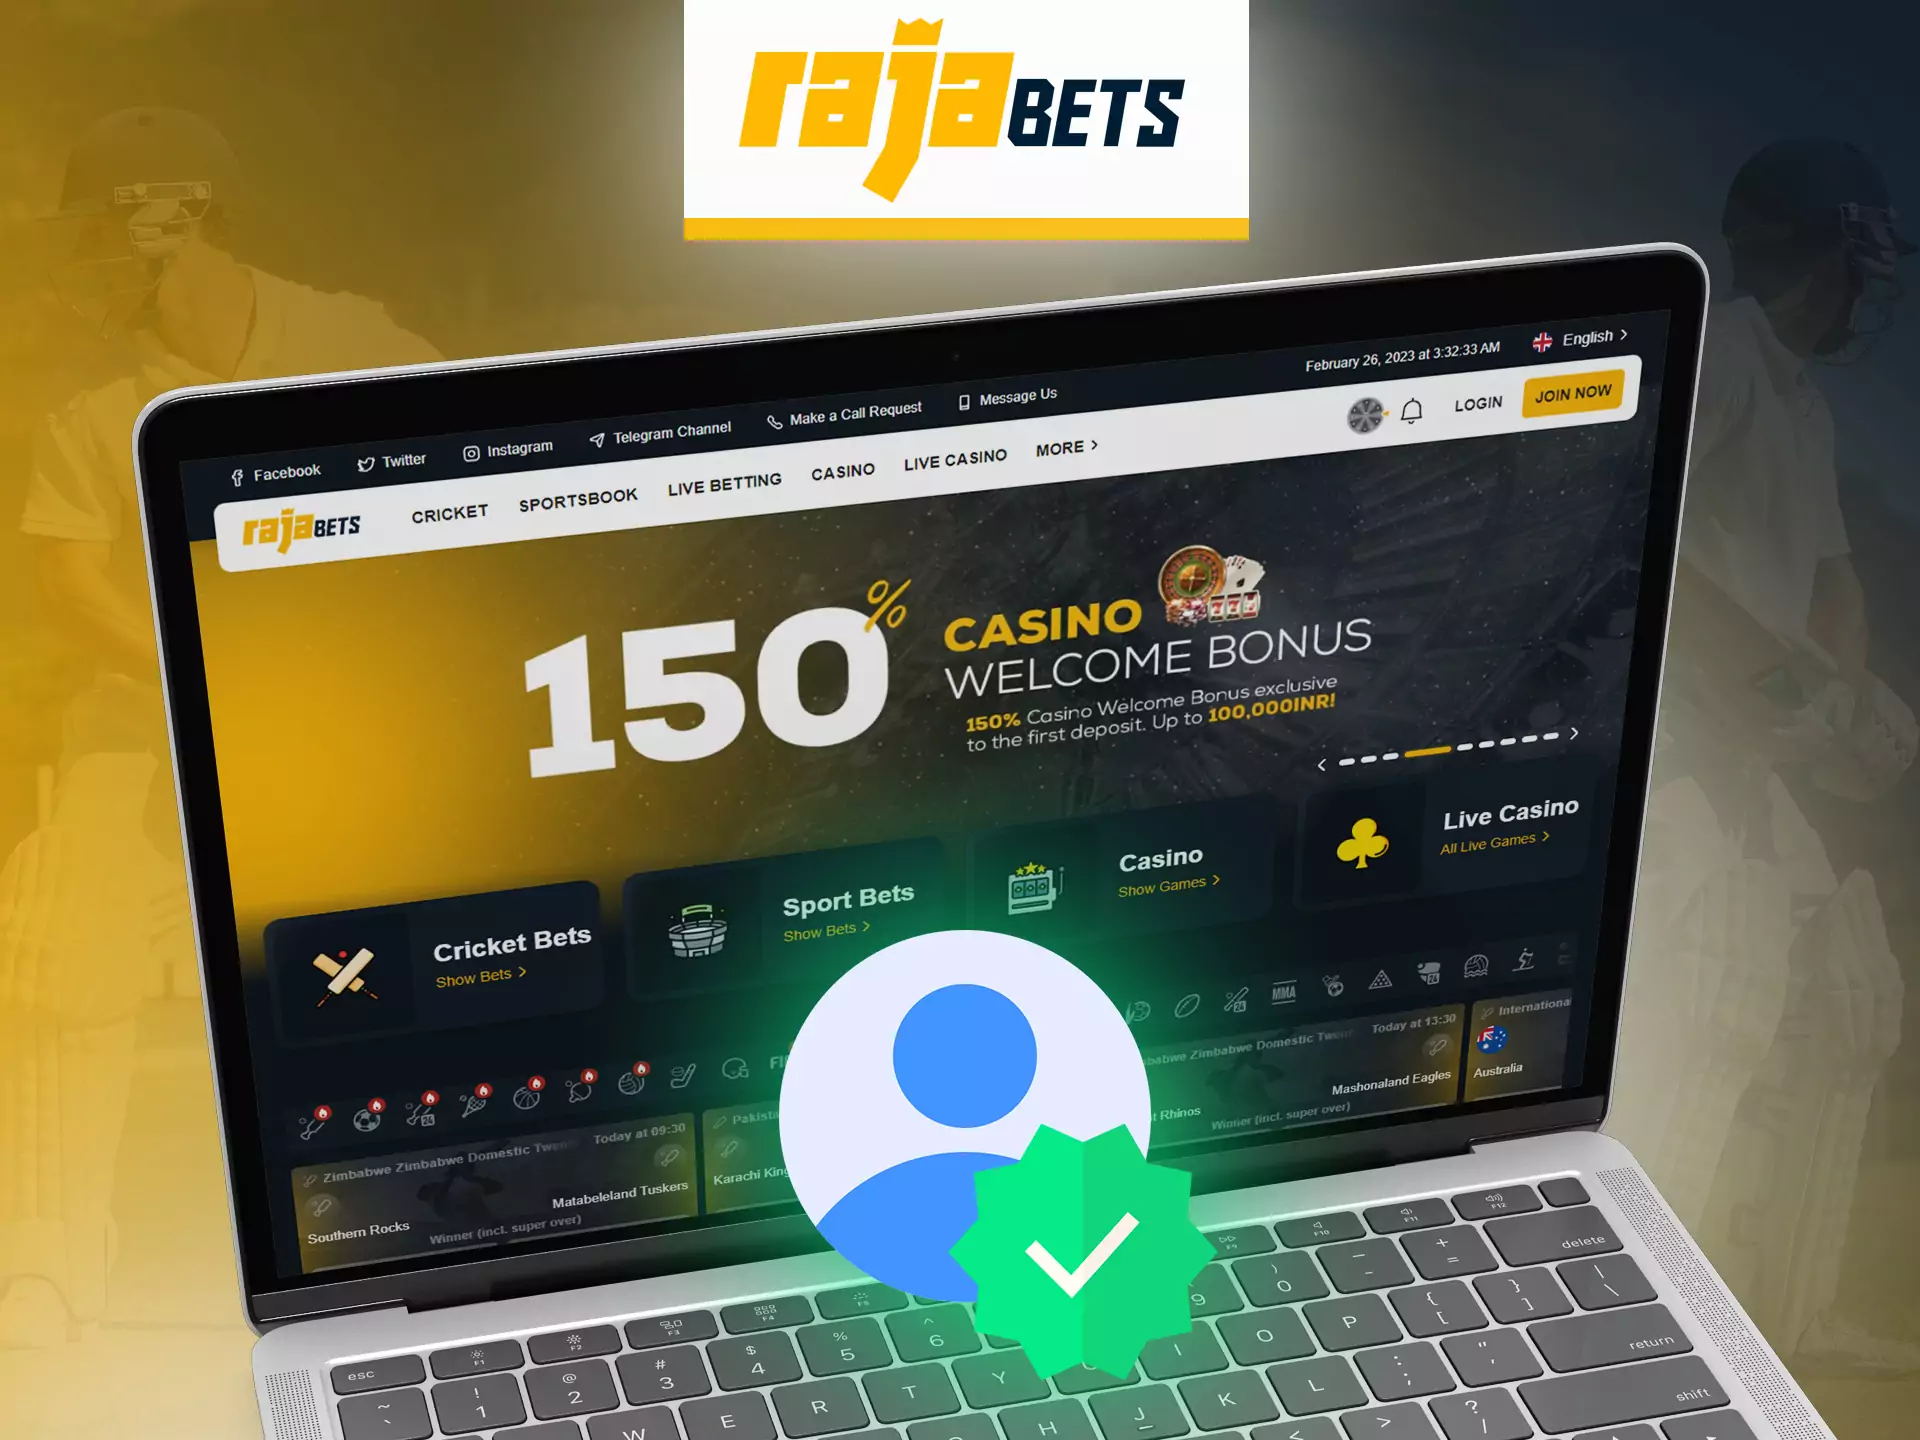 On Rajabets pass a simple verification to play and withdraw winnings.